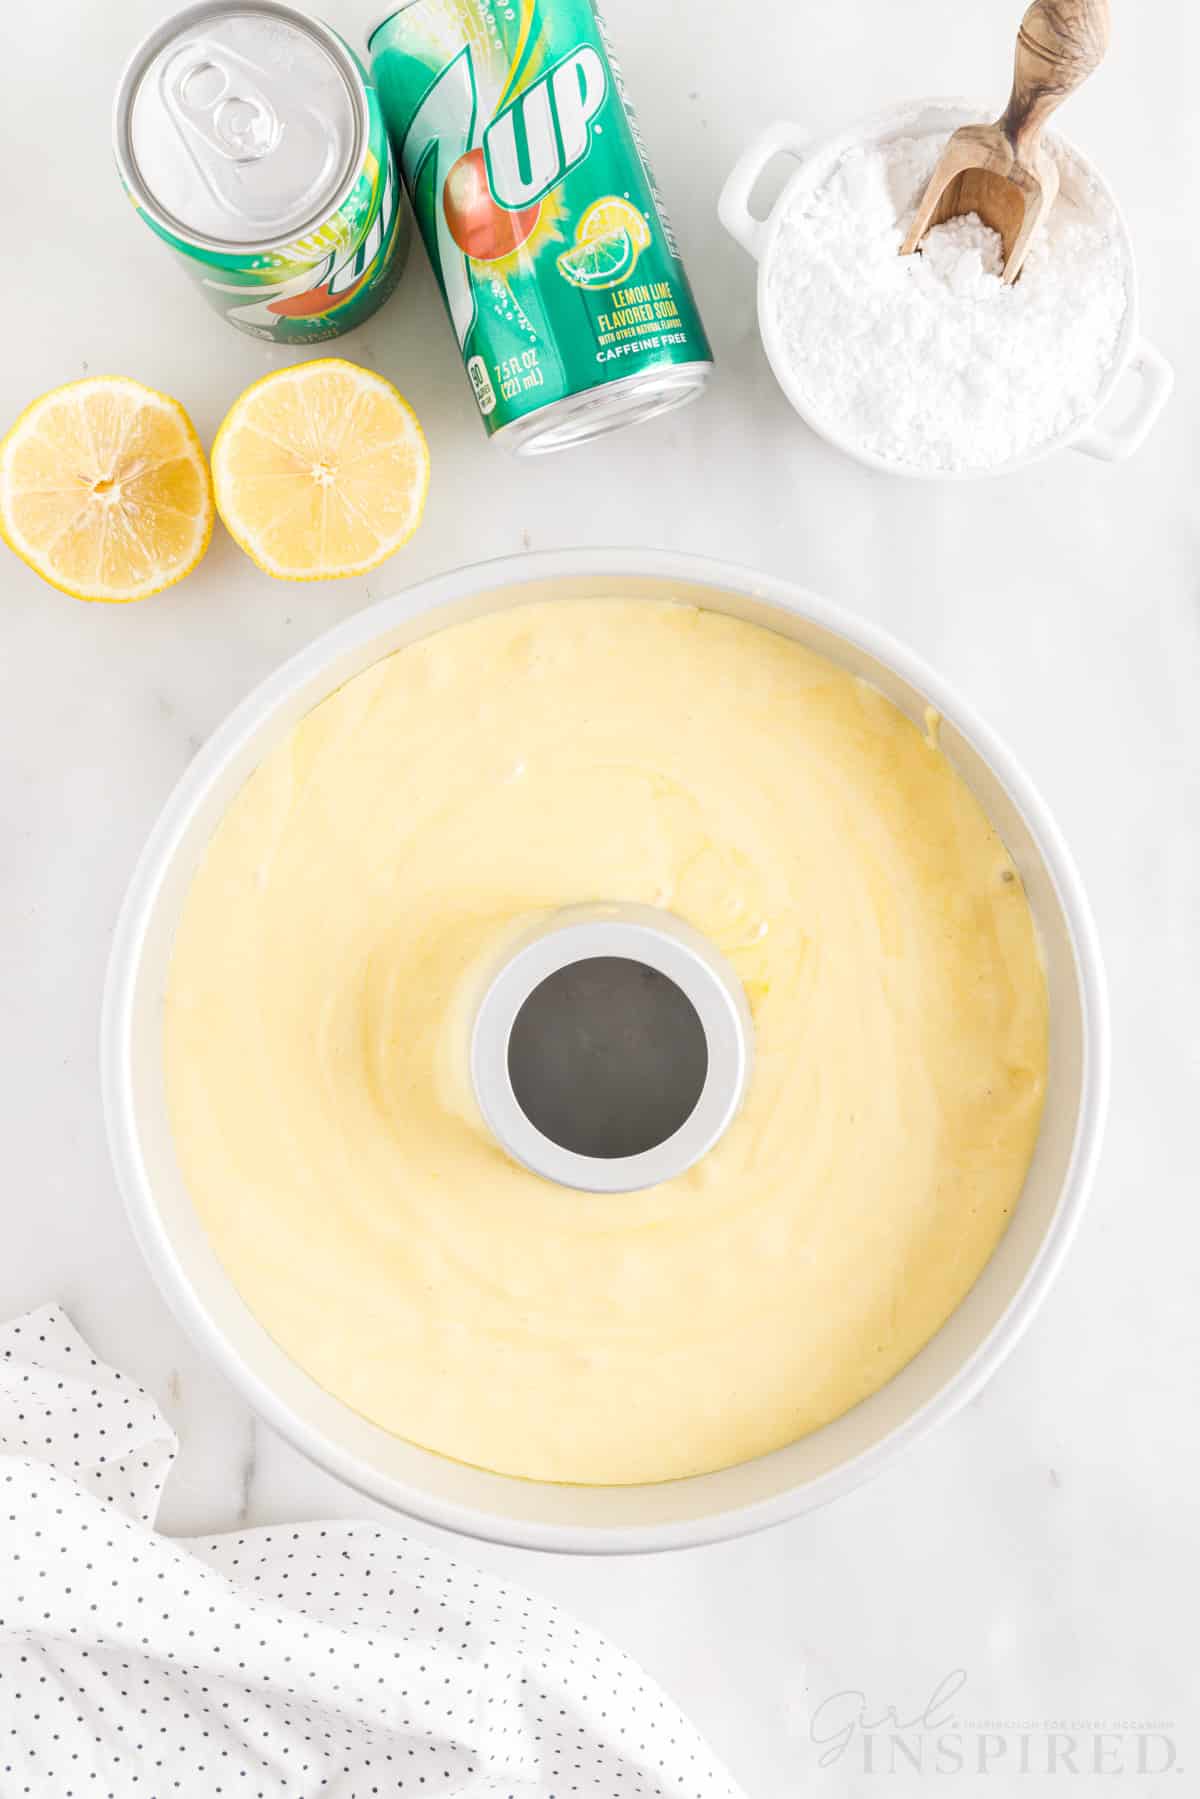 7 Up Cake with Cake Mix in a bundt cake pan.